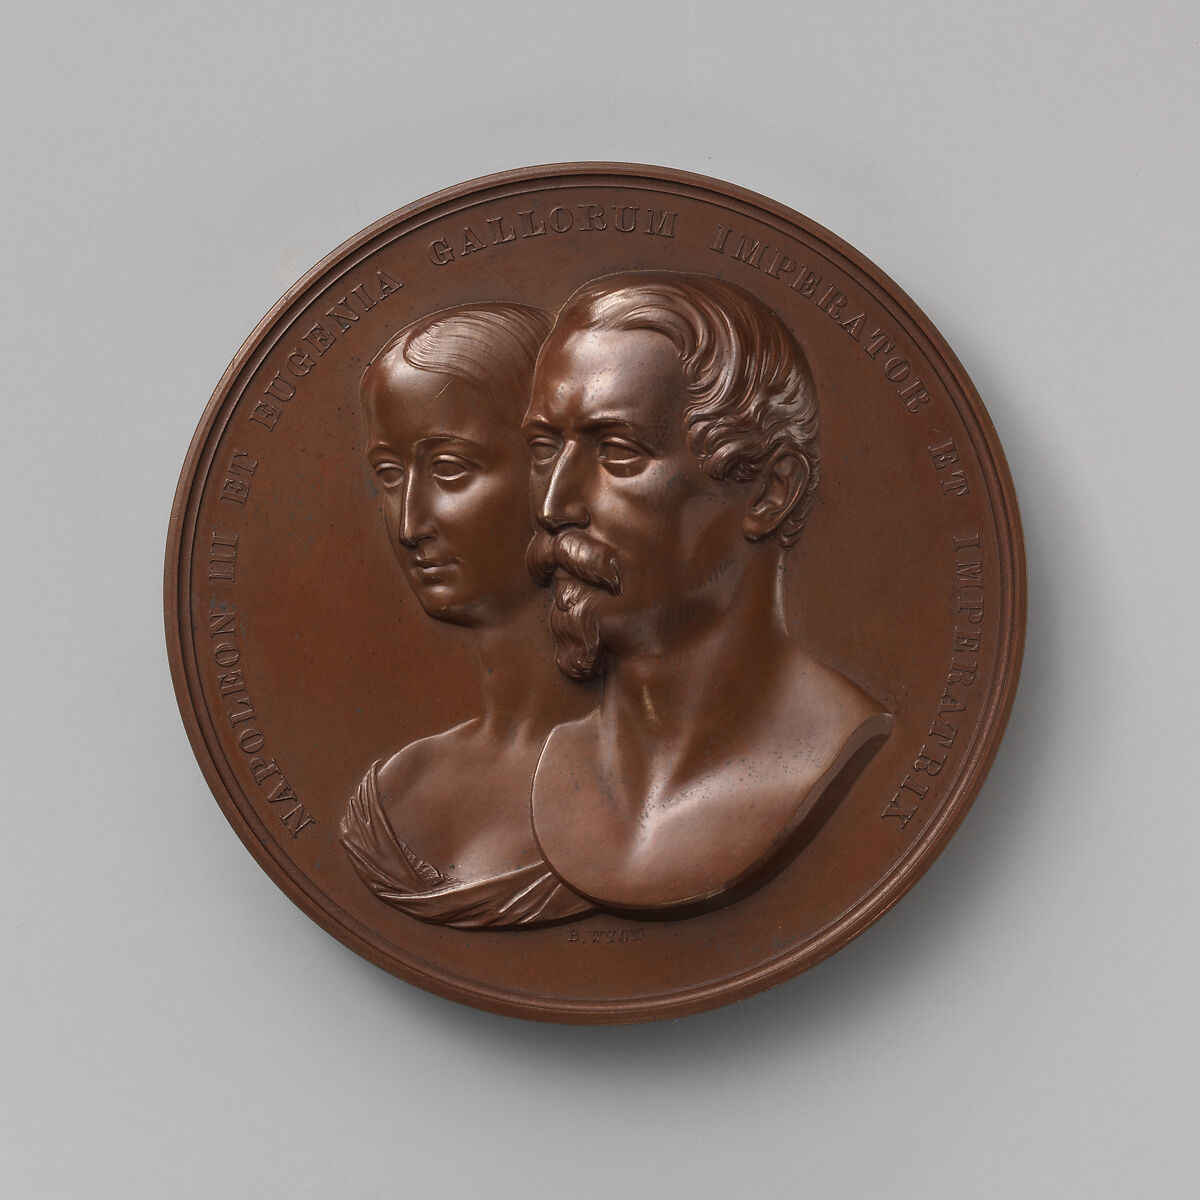 In Memory of the Visit of the Emperor and Empress of the French to the City of London, April 19, 1855, Medalist: Benjamin Wyon (British, London 1802–1858 London), Bronze, struck, British, London 